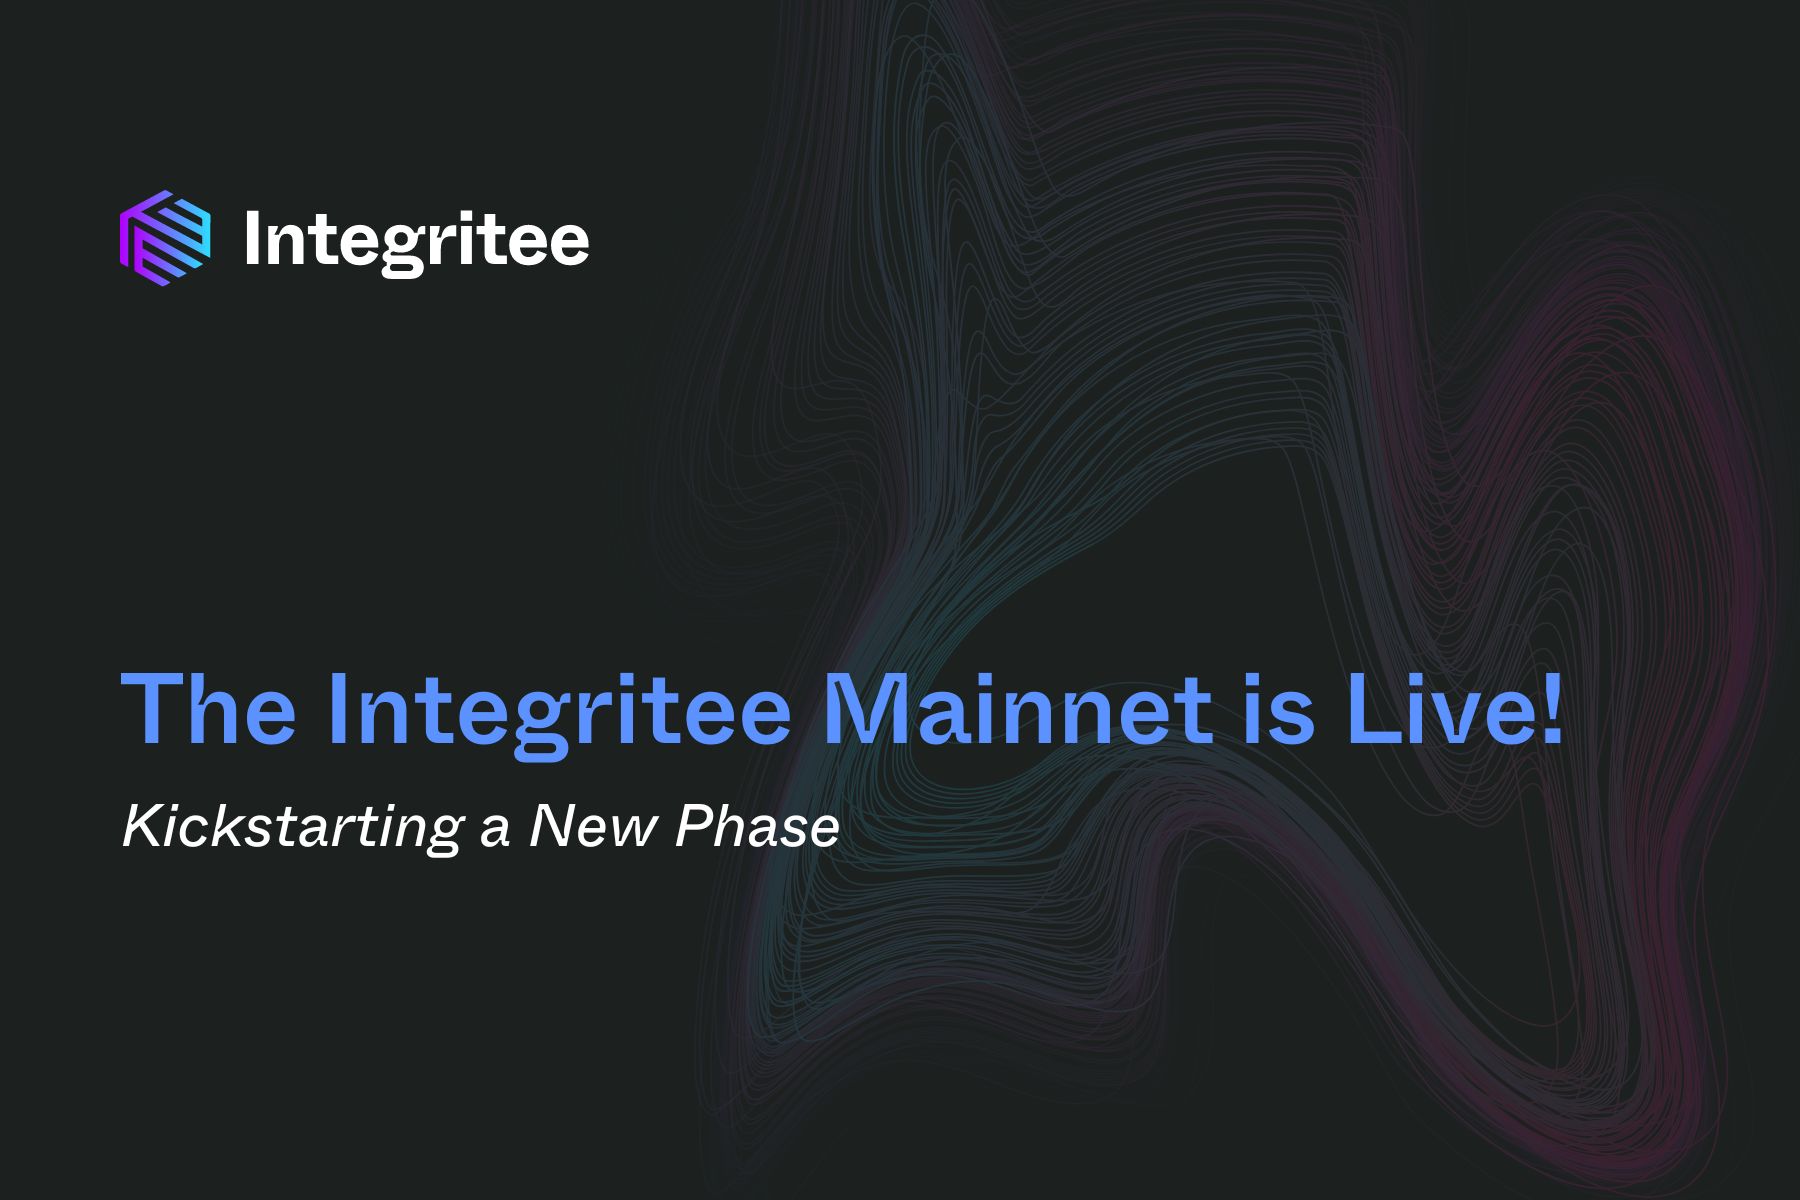 The Integritee Mainnet is Live!